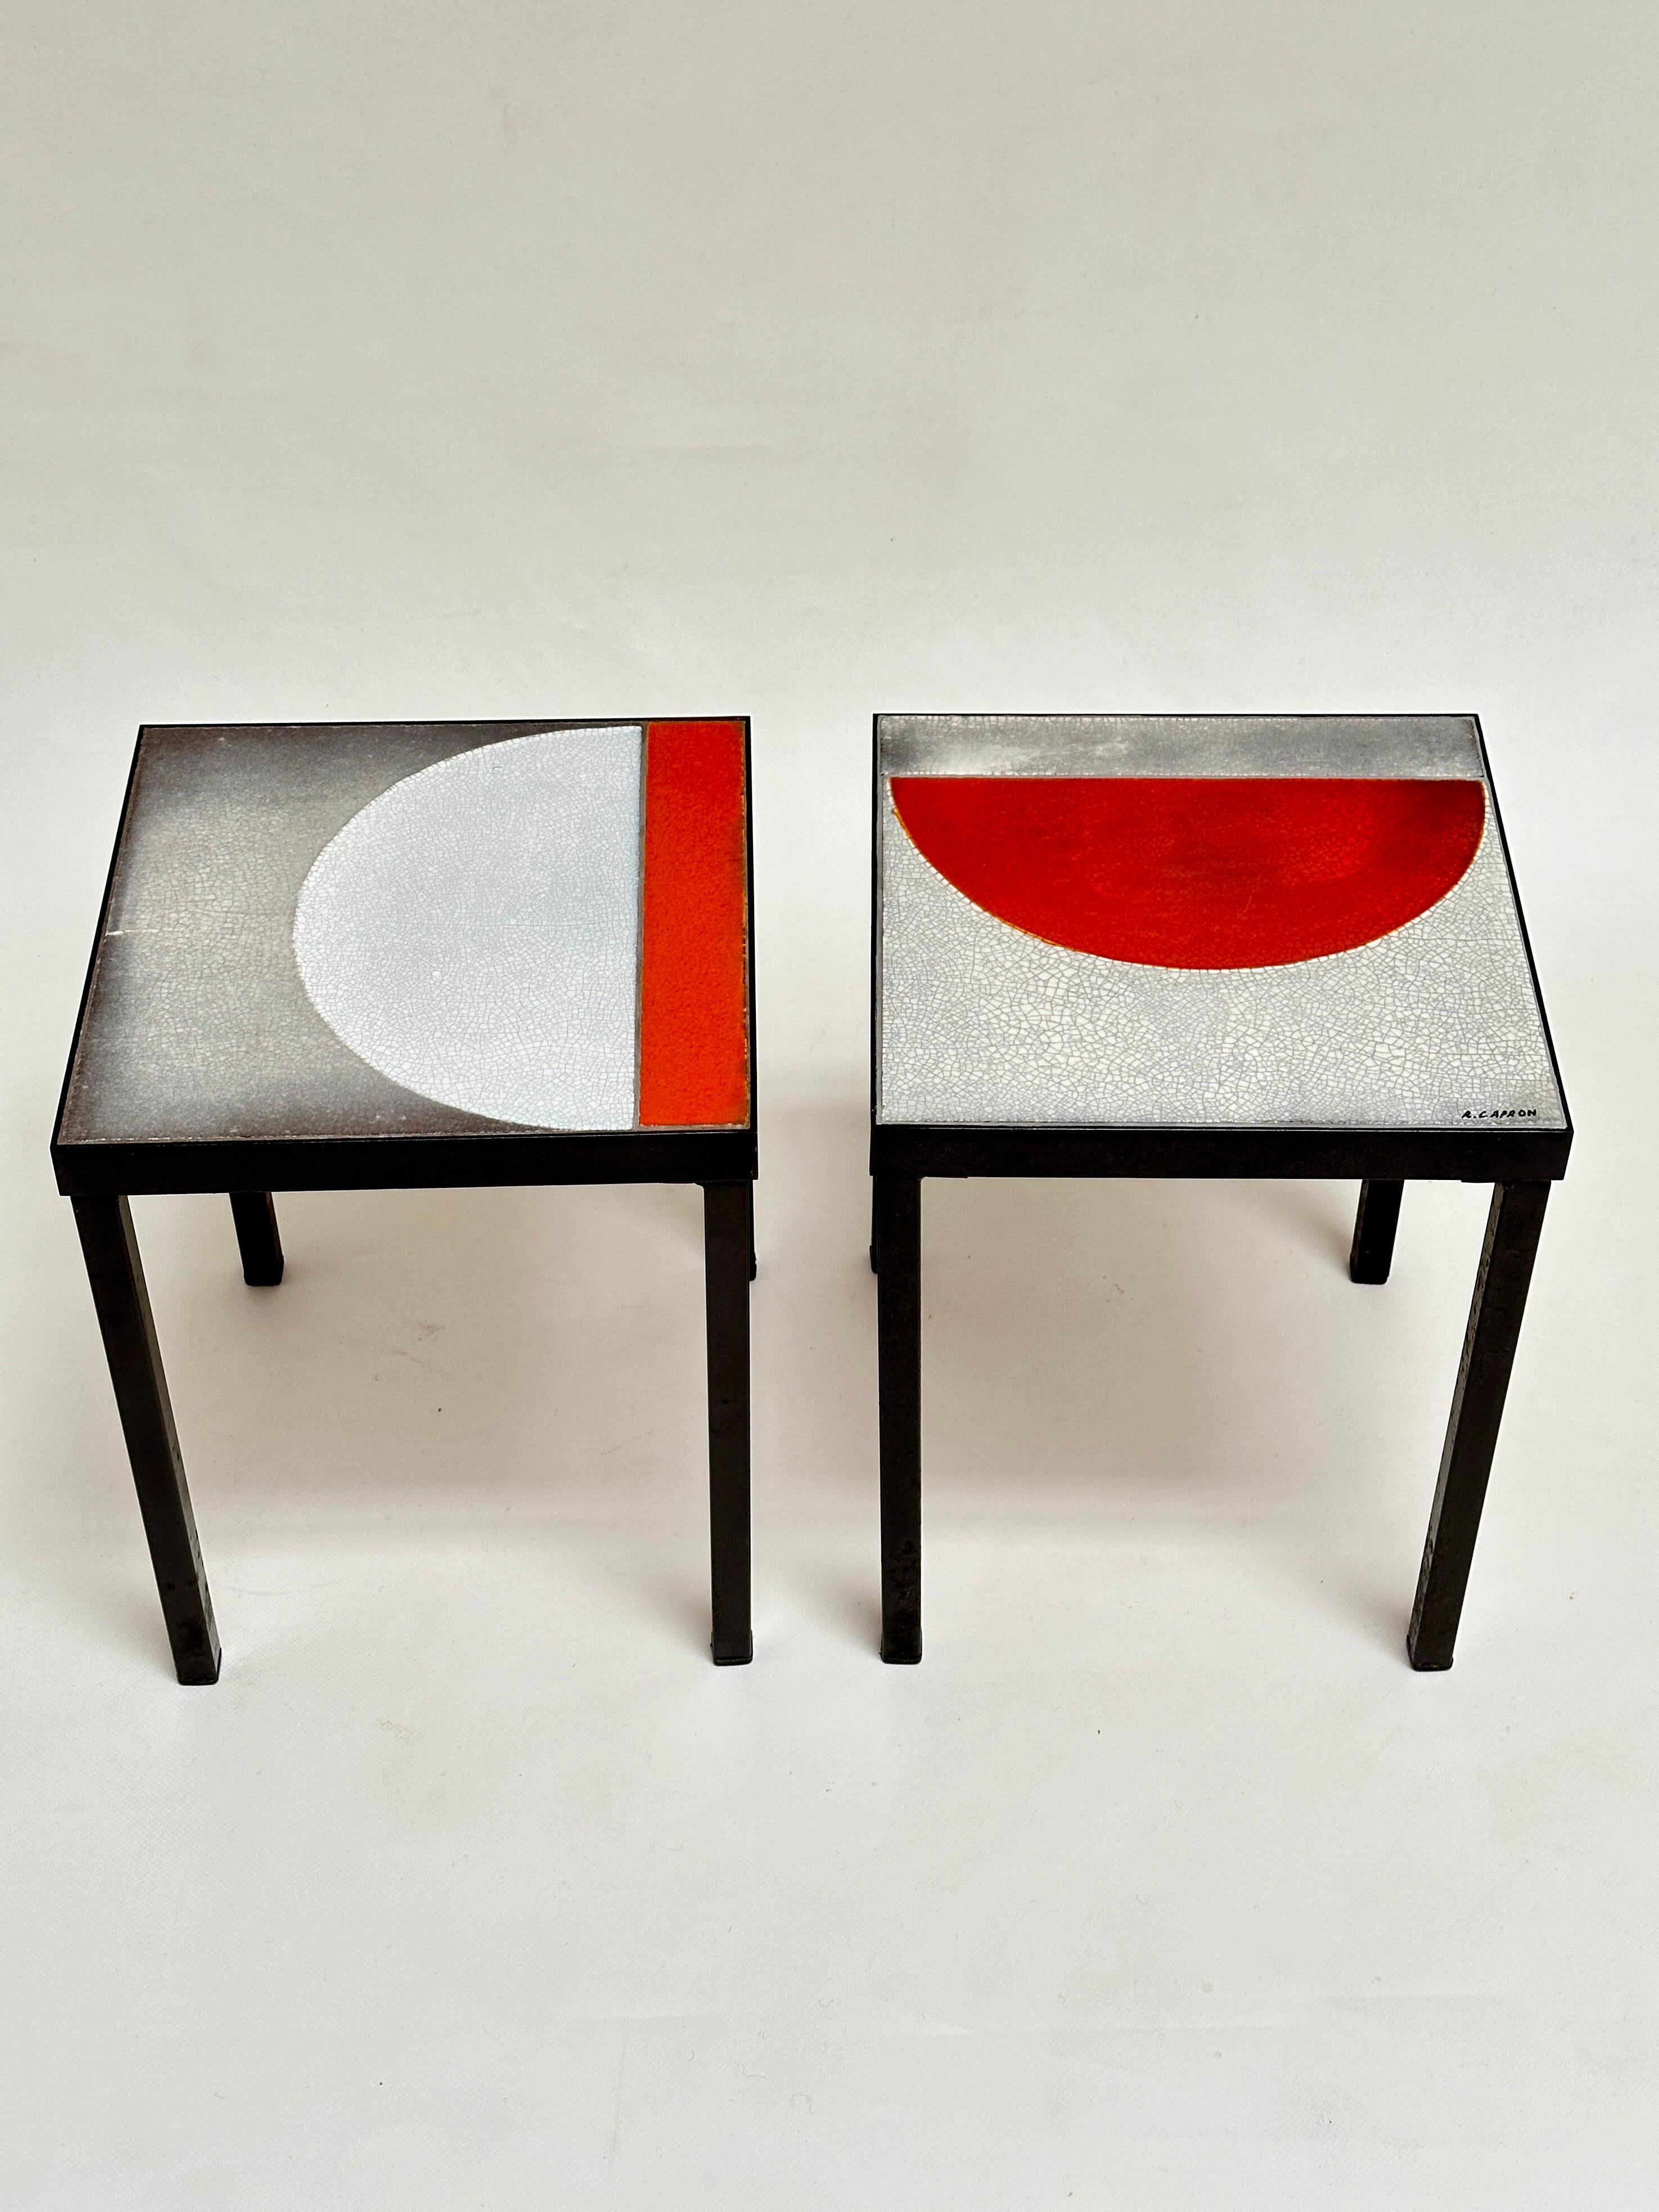 End tables made up of glazed lava top. 
Both structure and feet in black lacquered steel.
One table wears the Artist's signature.

Note that the feet are removable, which signs both an ingenious design and allows easy transport.
The table are in